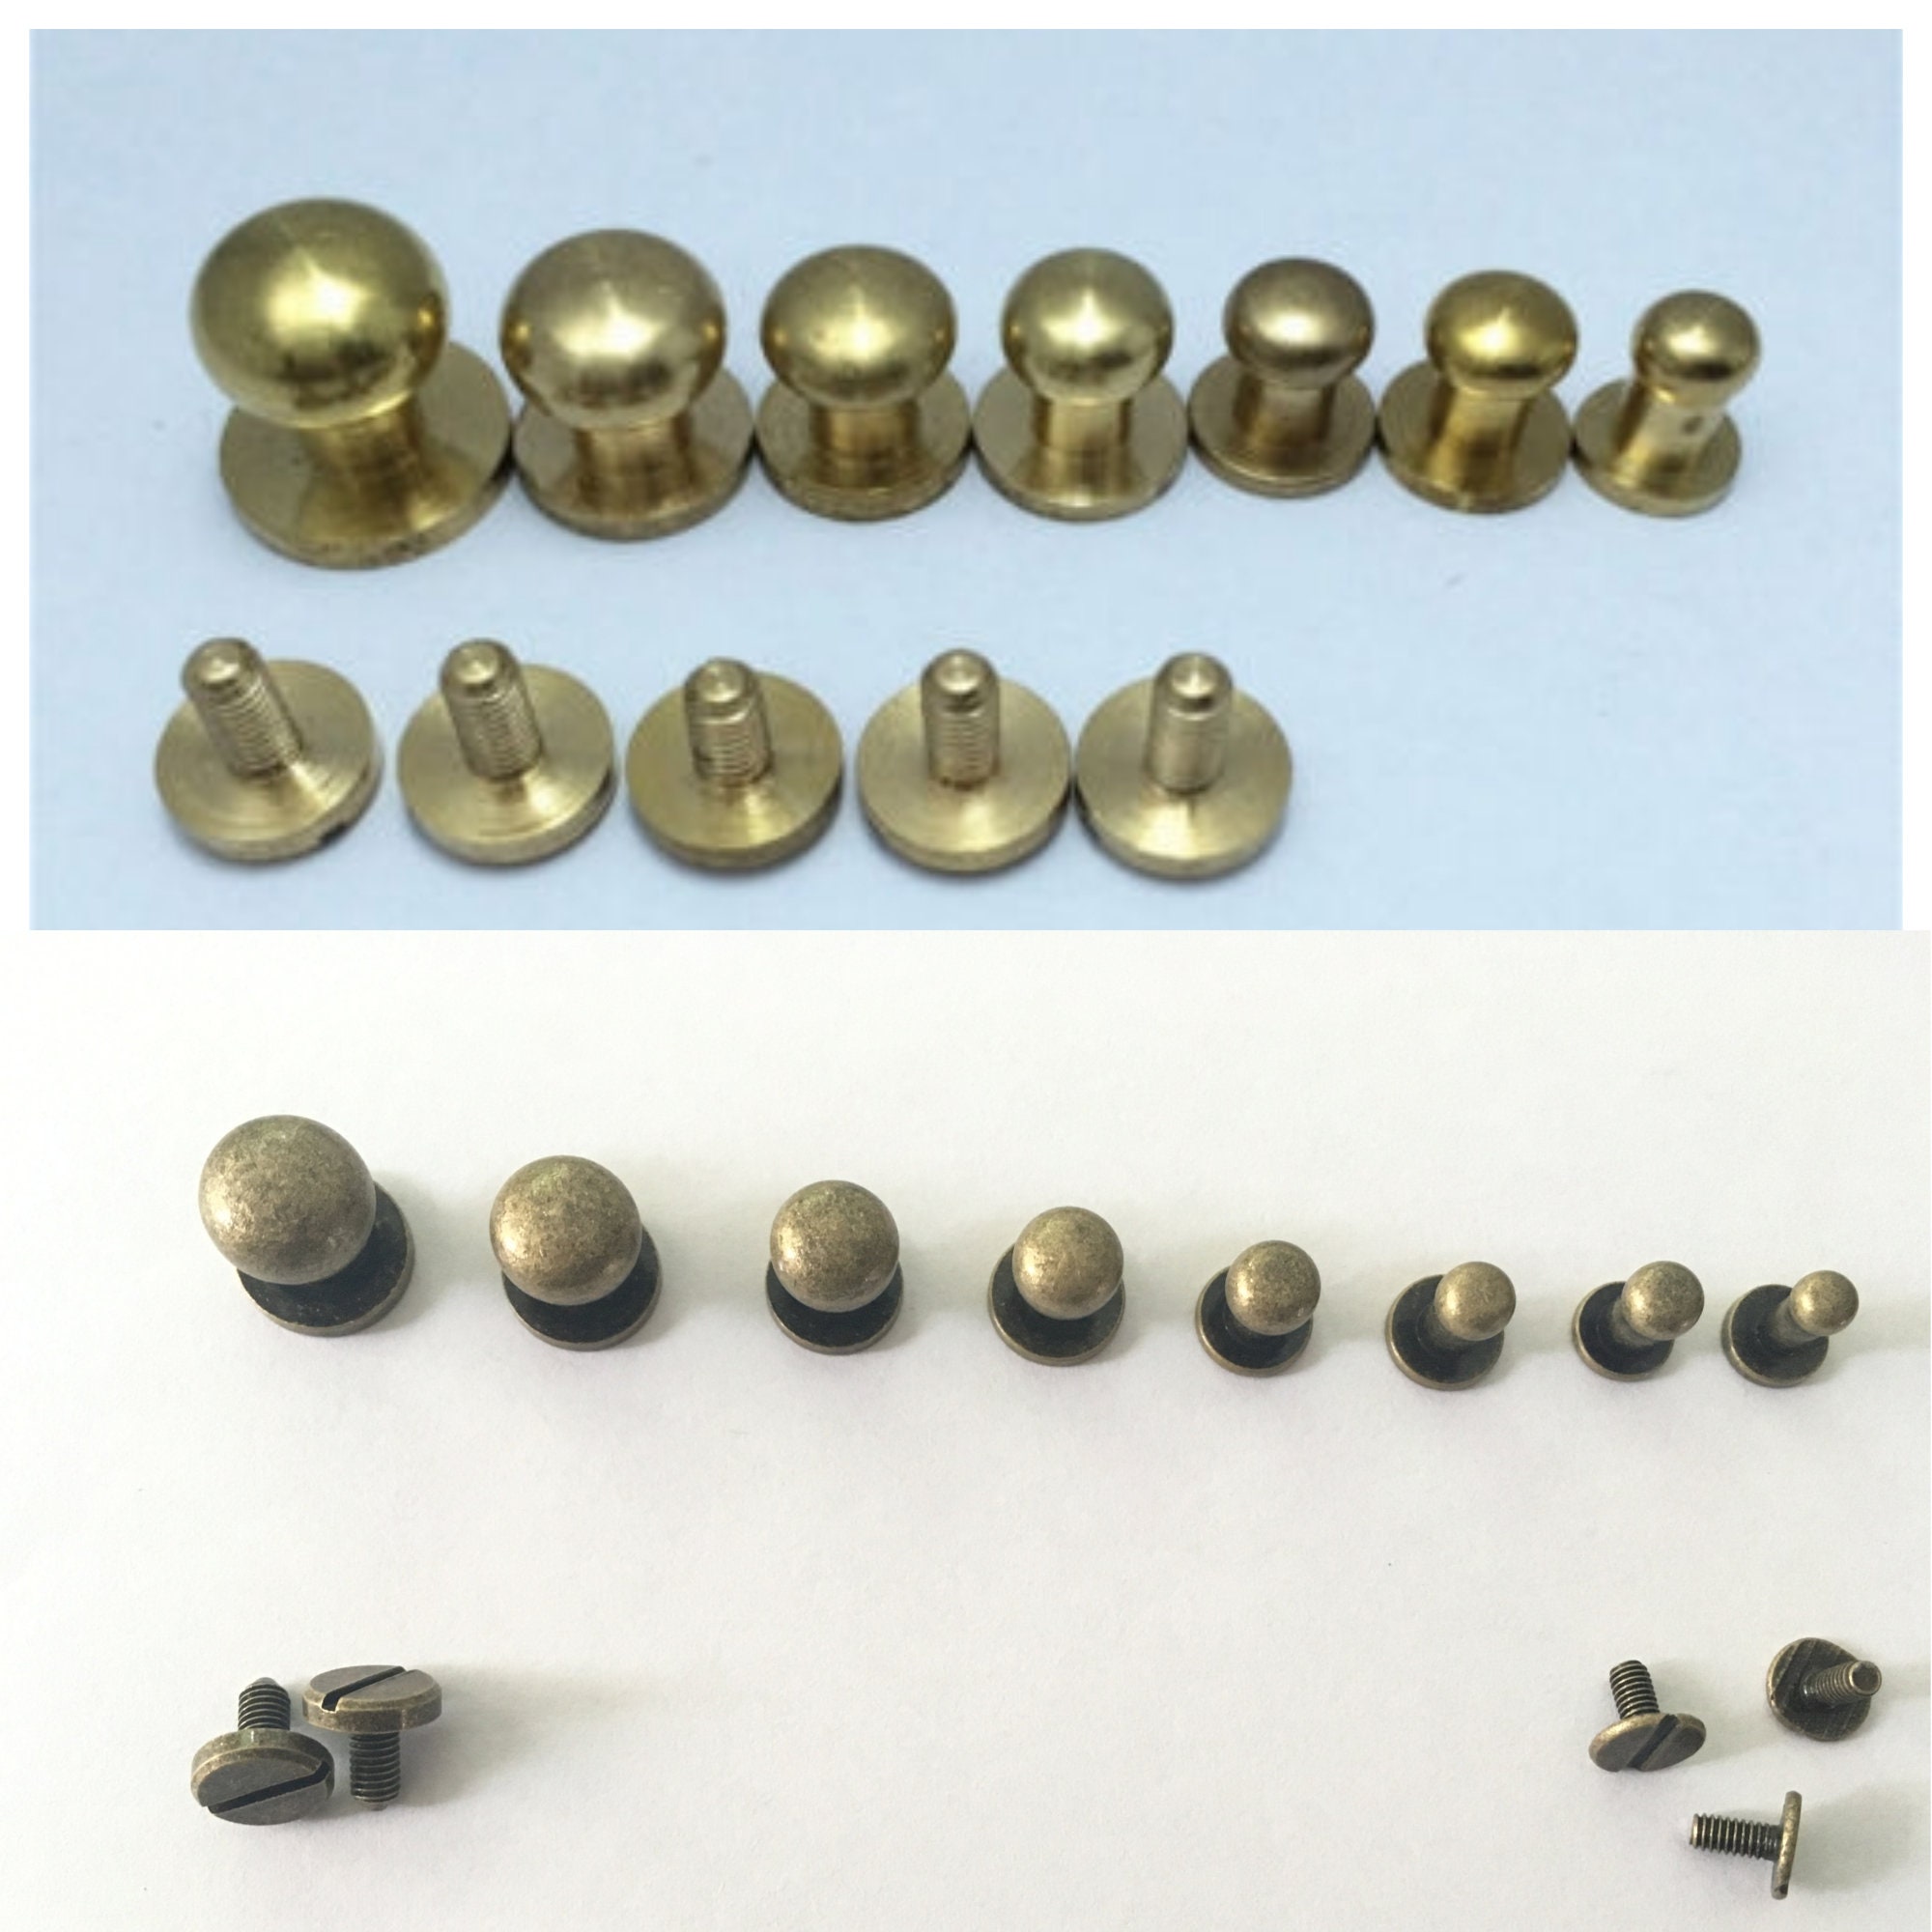 Details about   20pcs Sam brown browne screw studs Solid Brass Button Chicago Nail Rivets